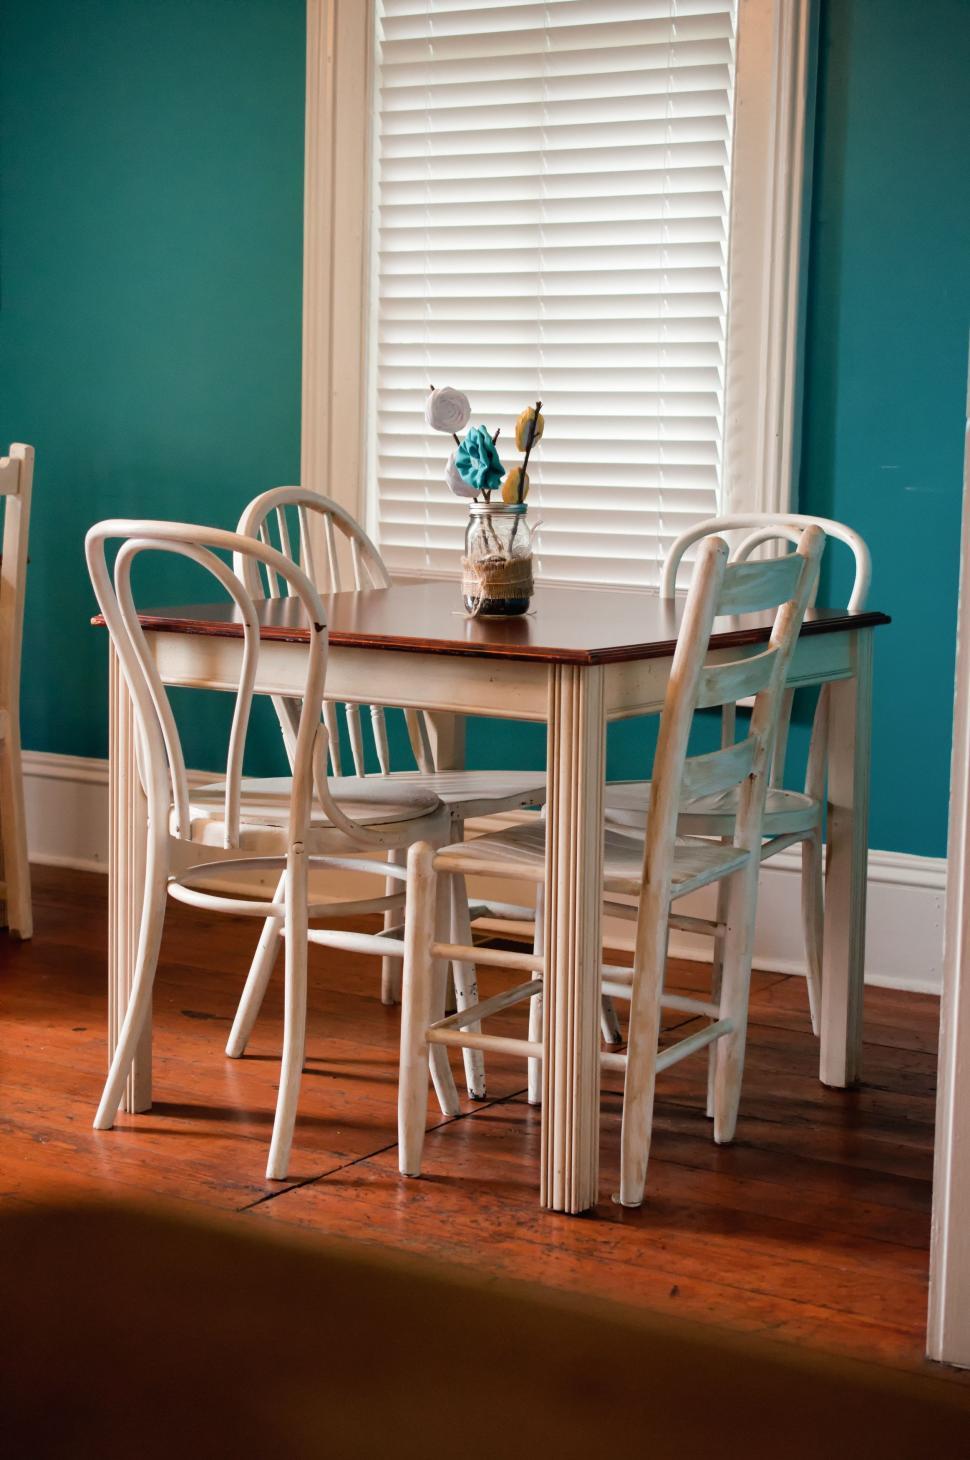 Free Image of Dining Room Table With Chairs and Vase of Flowers 